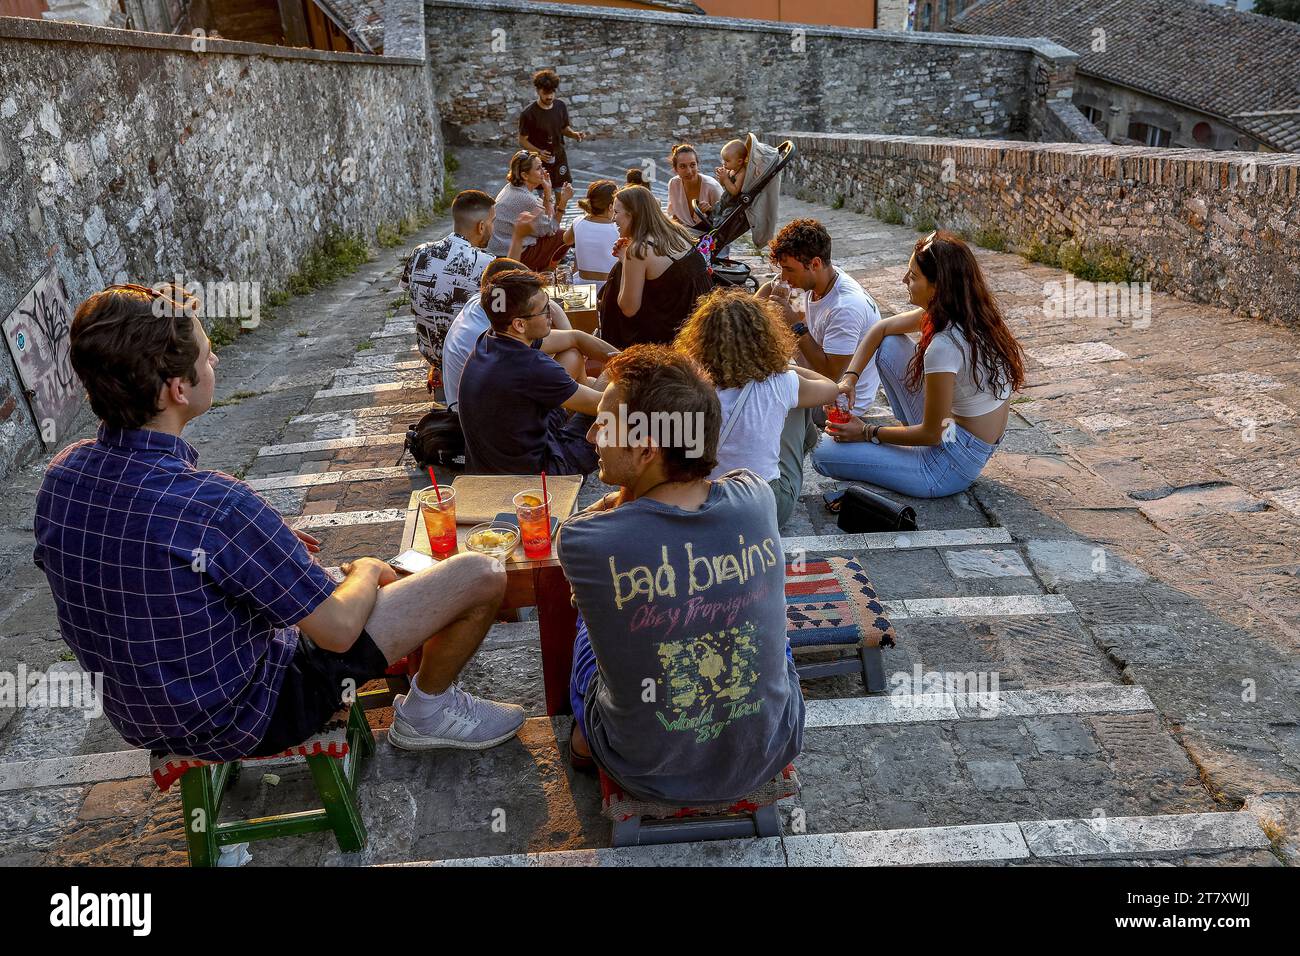 Young people sitting in a bar located on an urban staircase in Perugia, Umbria, Italy, Europe Stock Photo